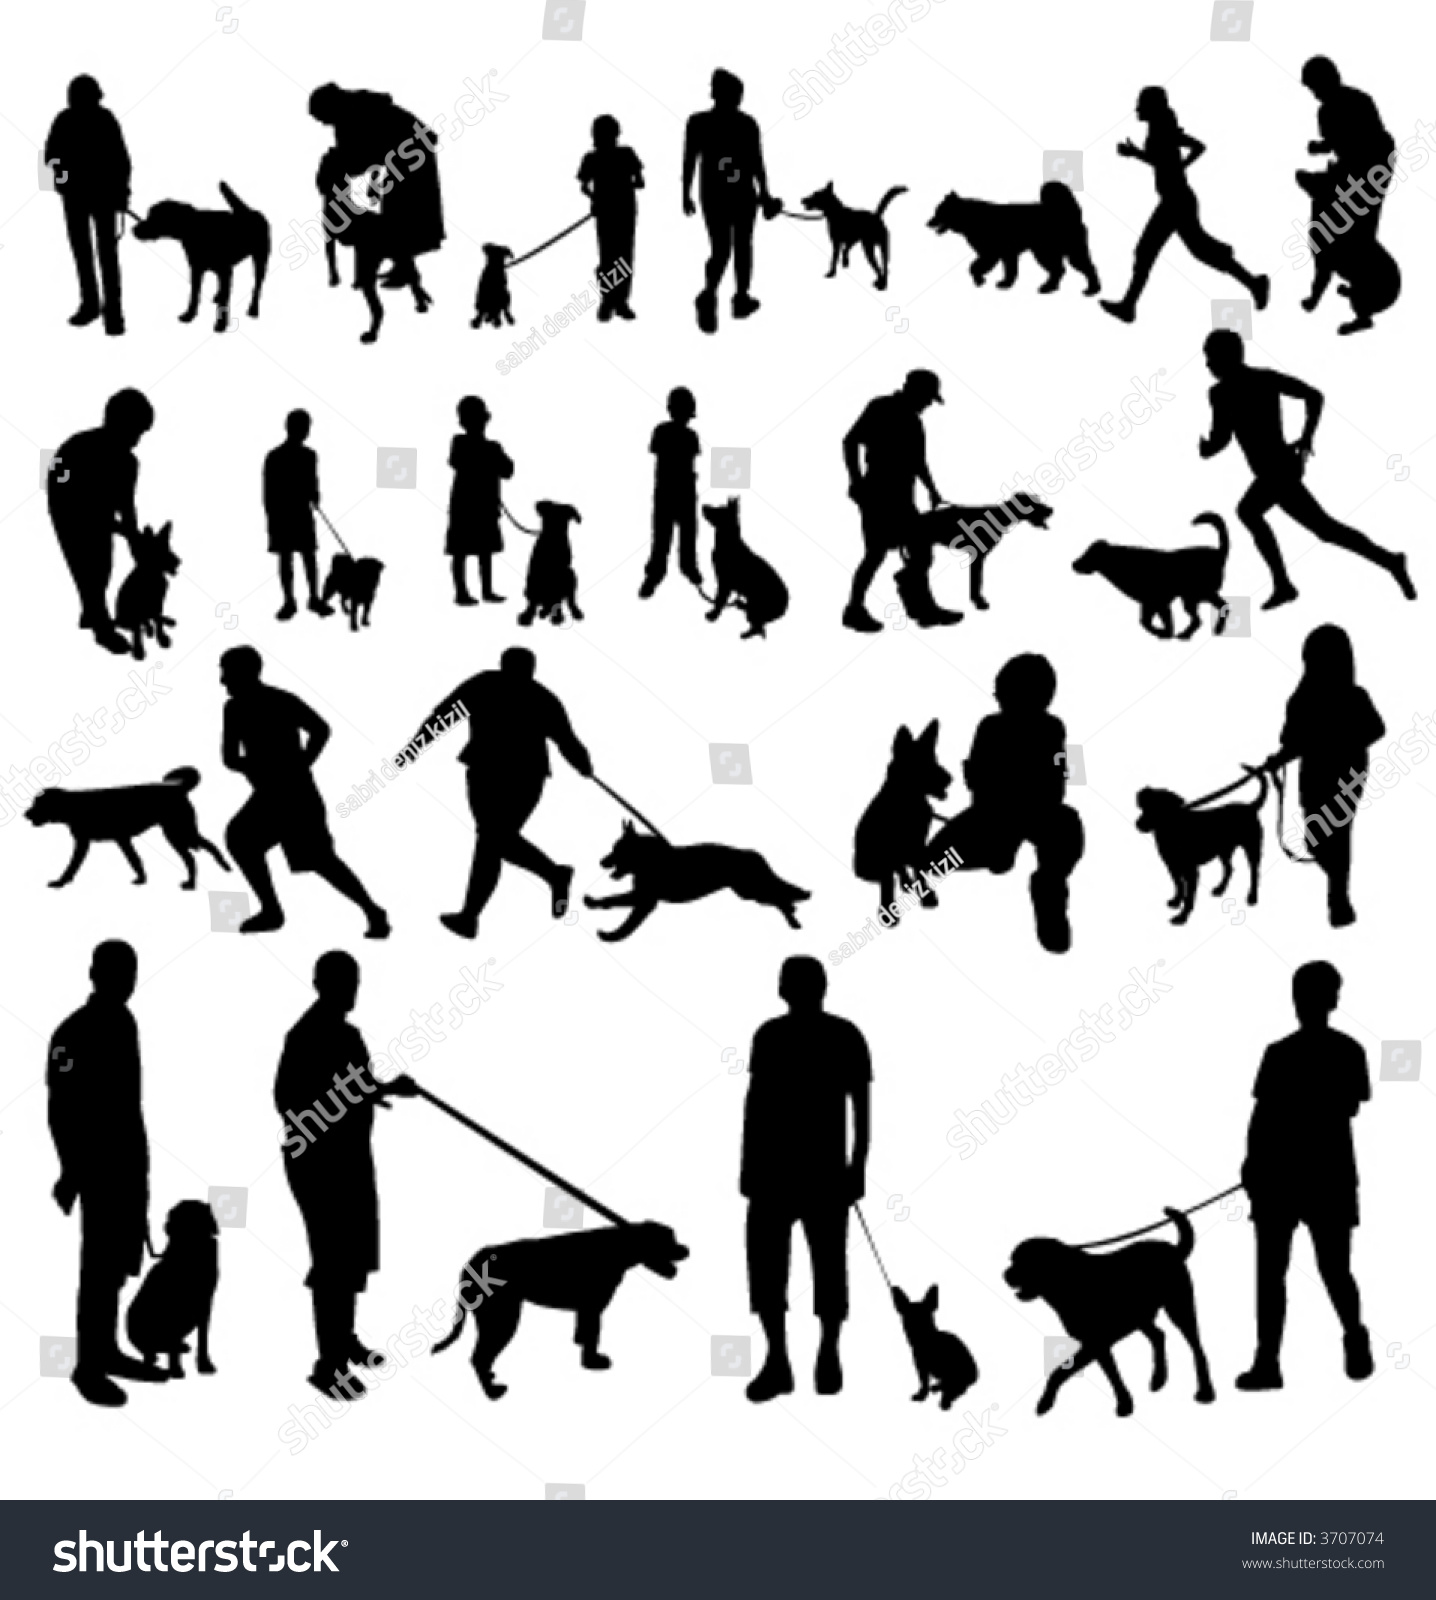 People With Dogs Silhouettes Stock Vector 3707074 : Shutterstock